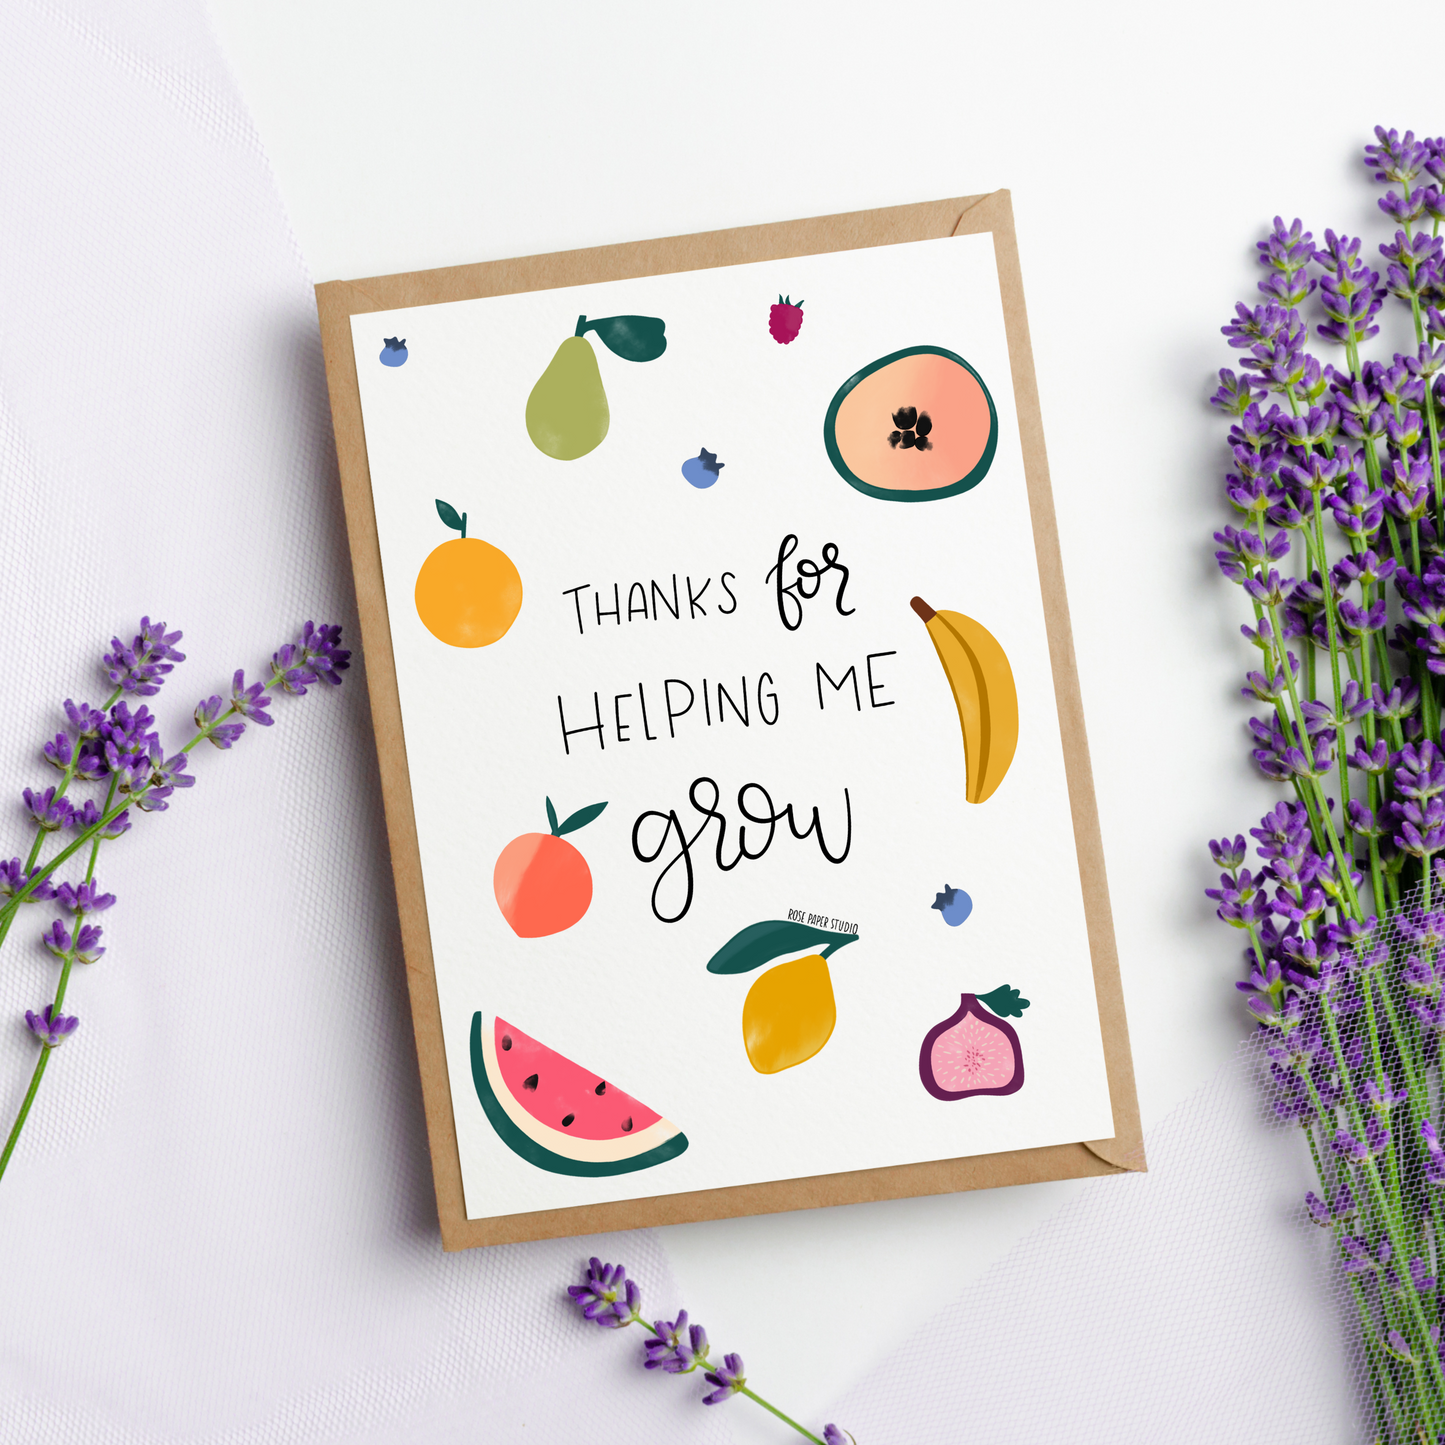 Thanks for Helping Me Grow Card | Sweet Fruit Motif Card | Thank You Card | Handmade Blank Greeting Card | Modern Calligraphy